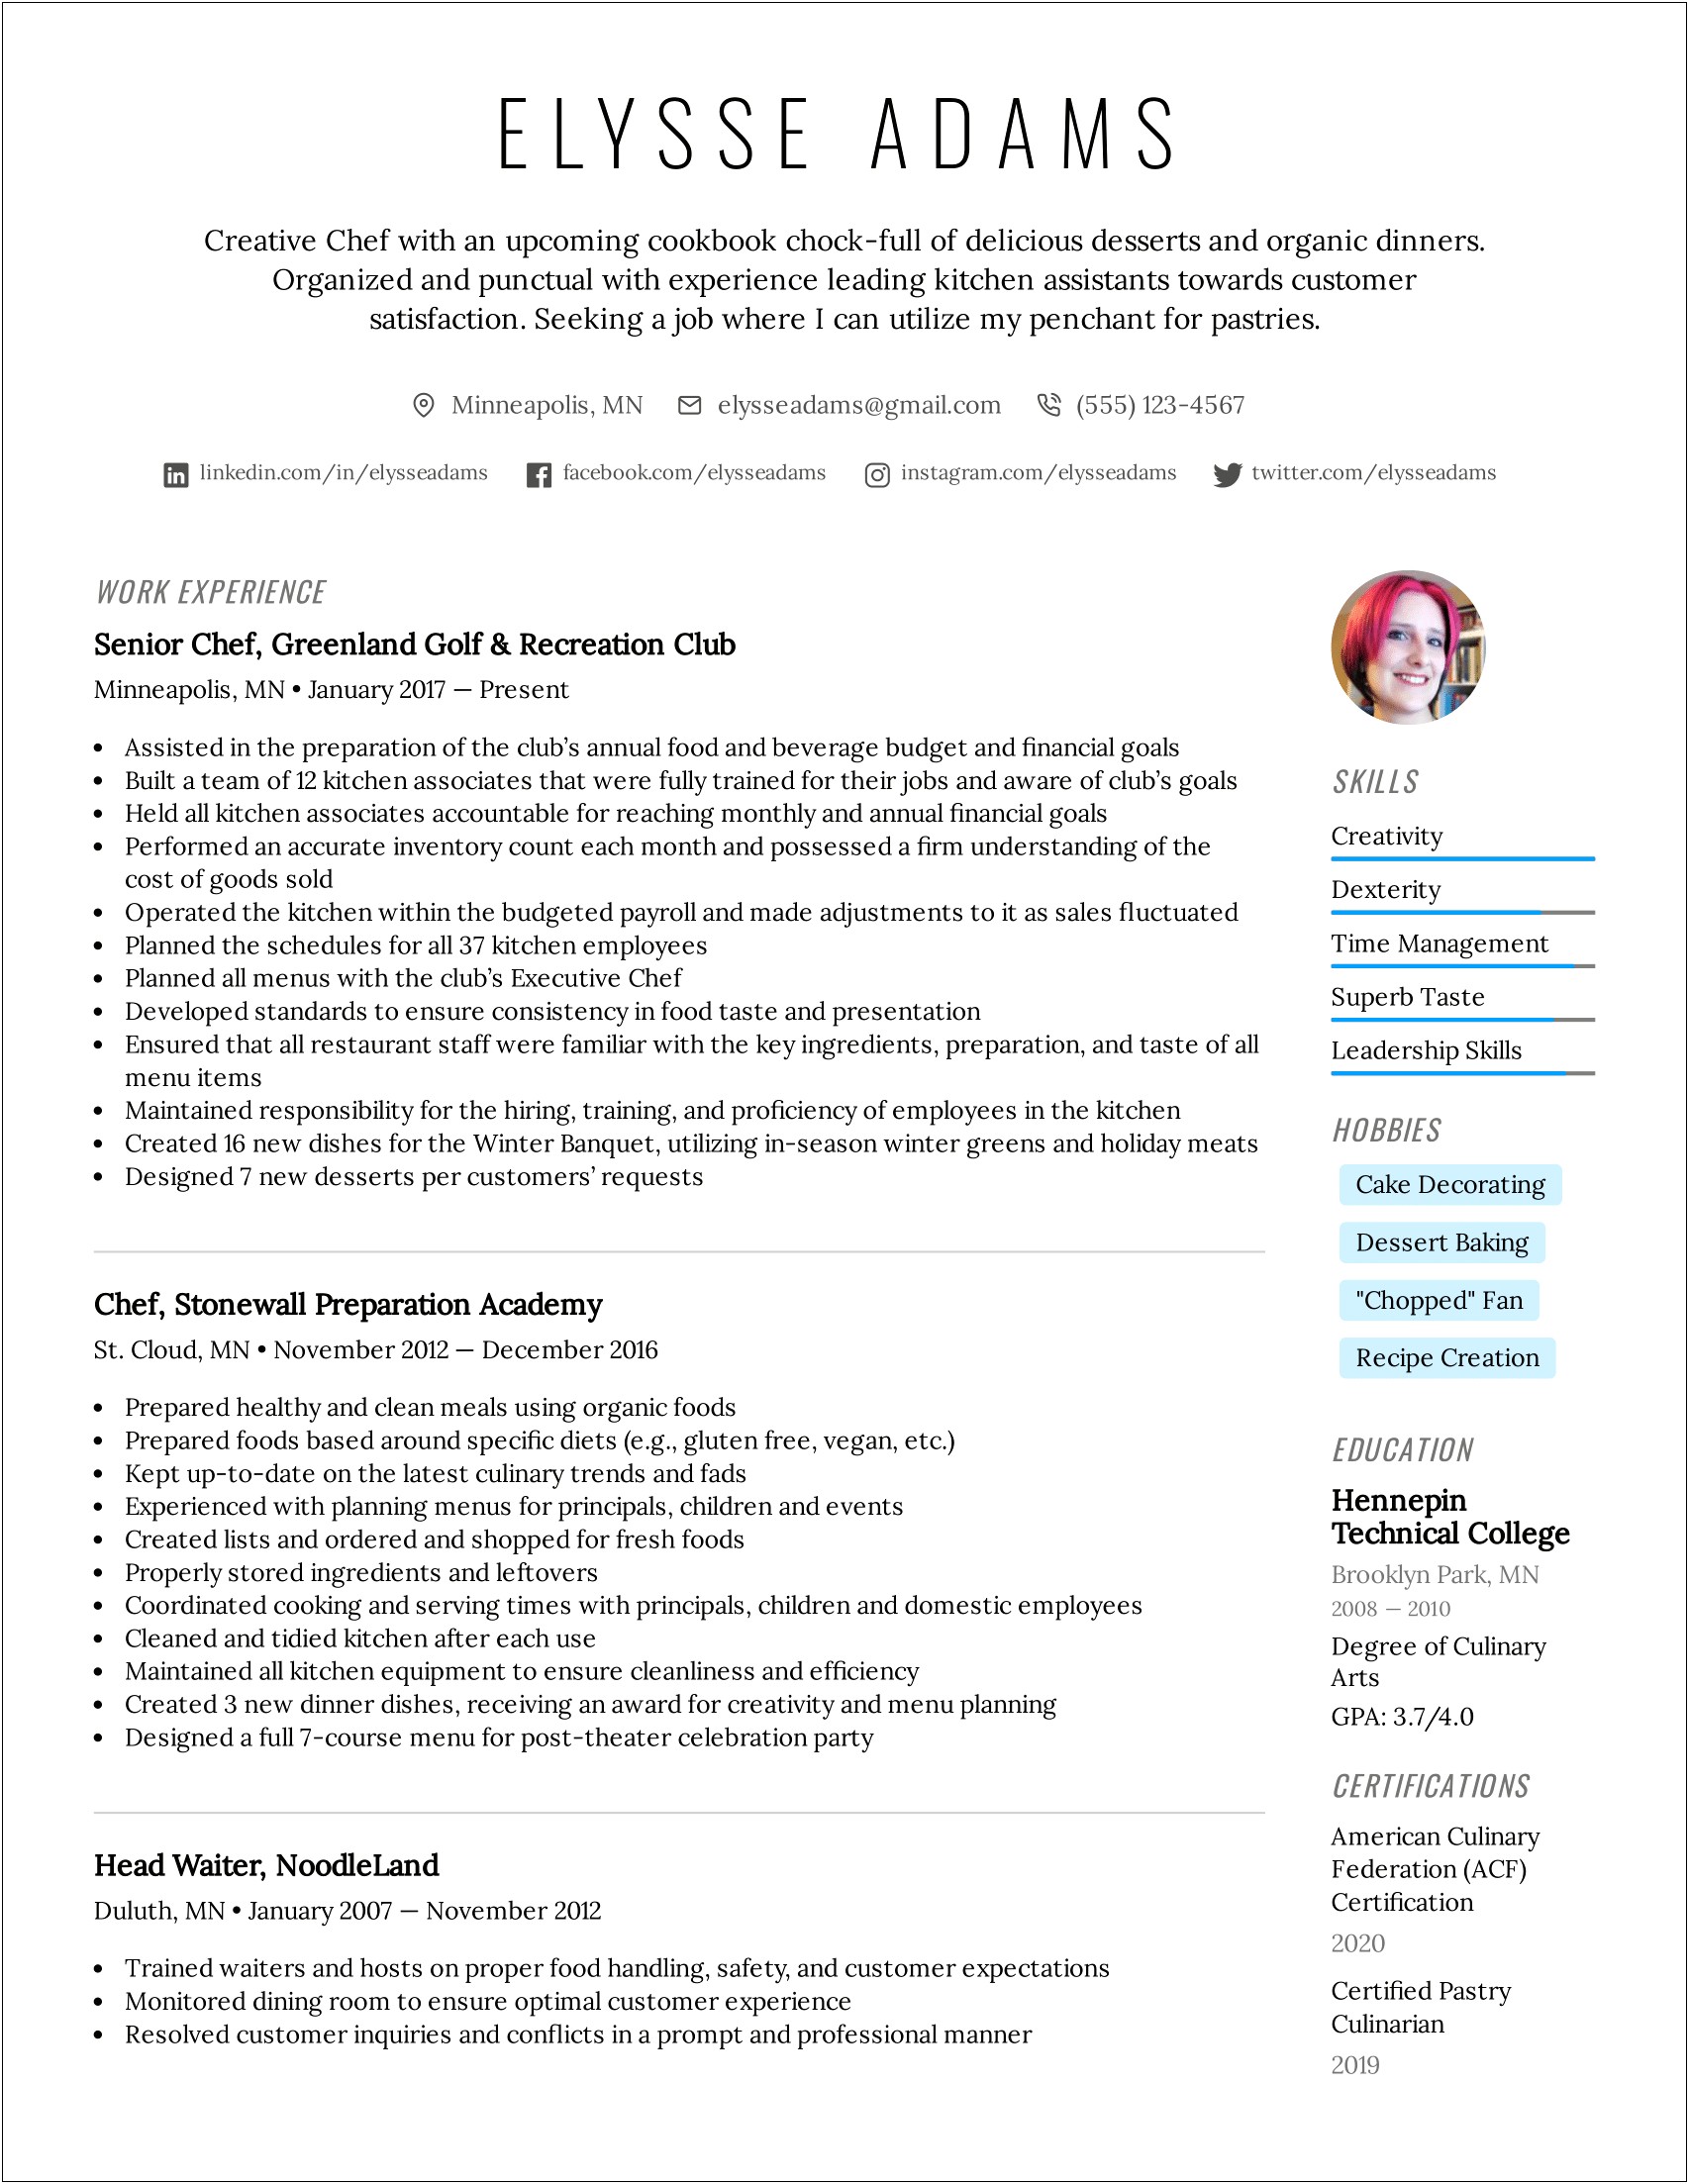 Technical Skills Meaning In Resume